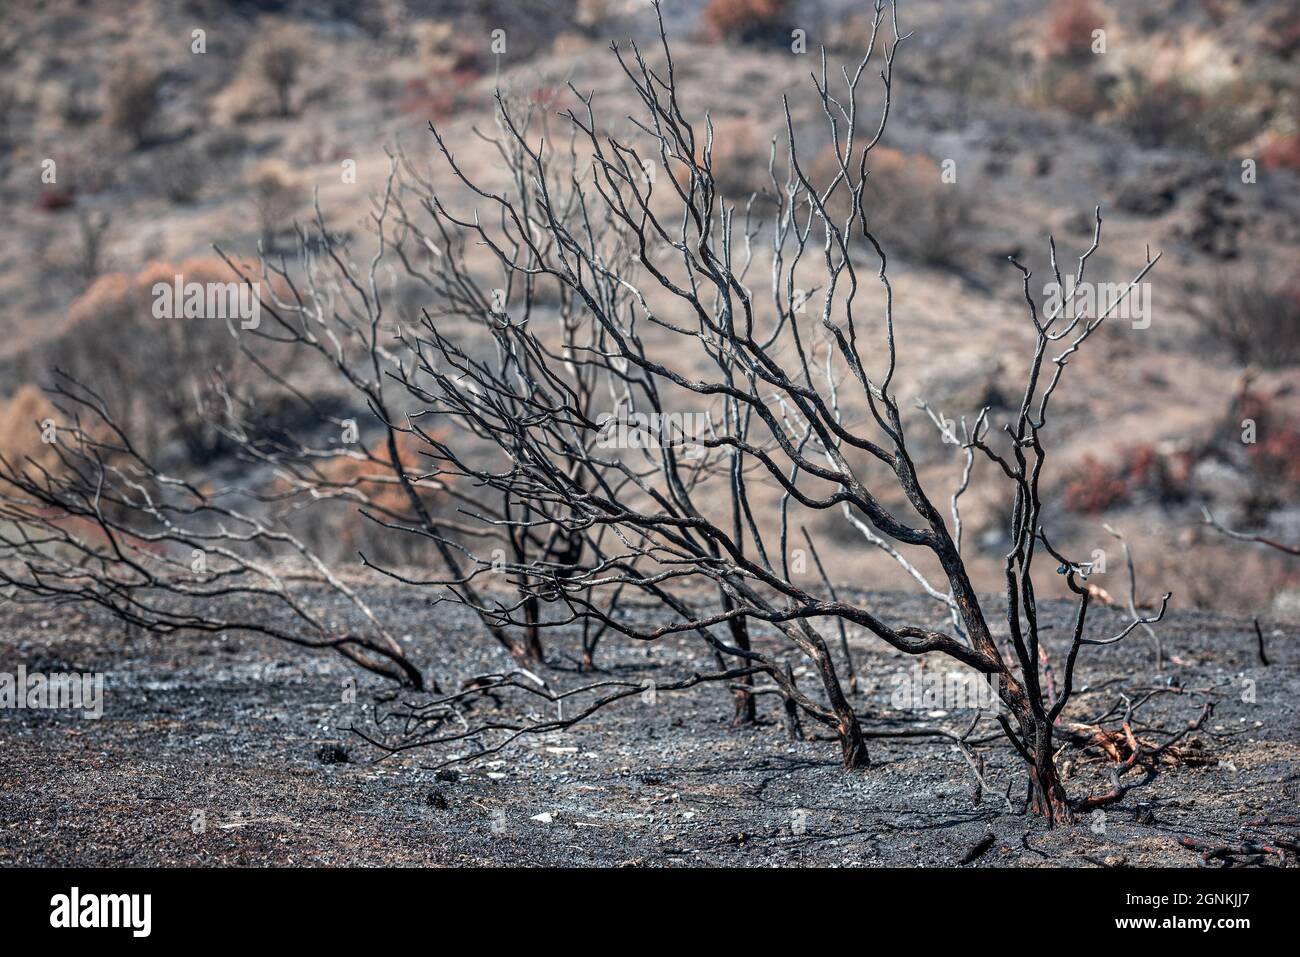 Scorched trees and ground covered with ashes after wildfire in rural area Stock Photo